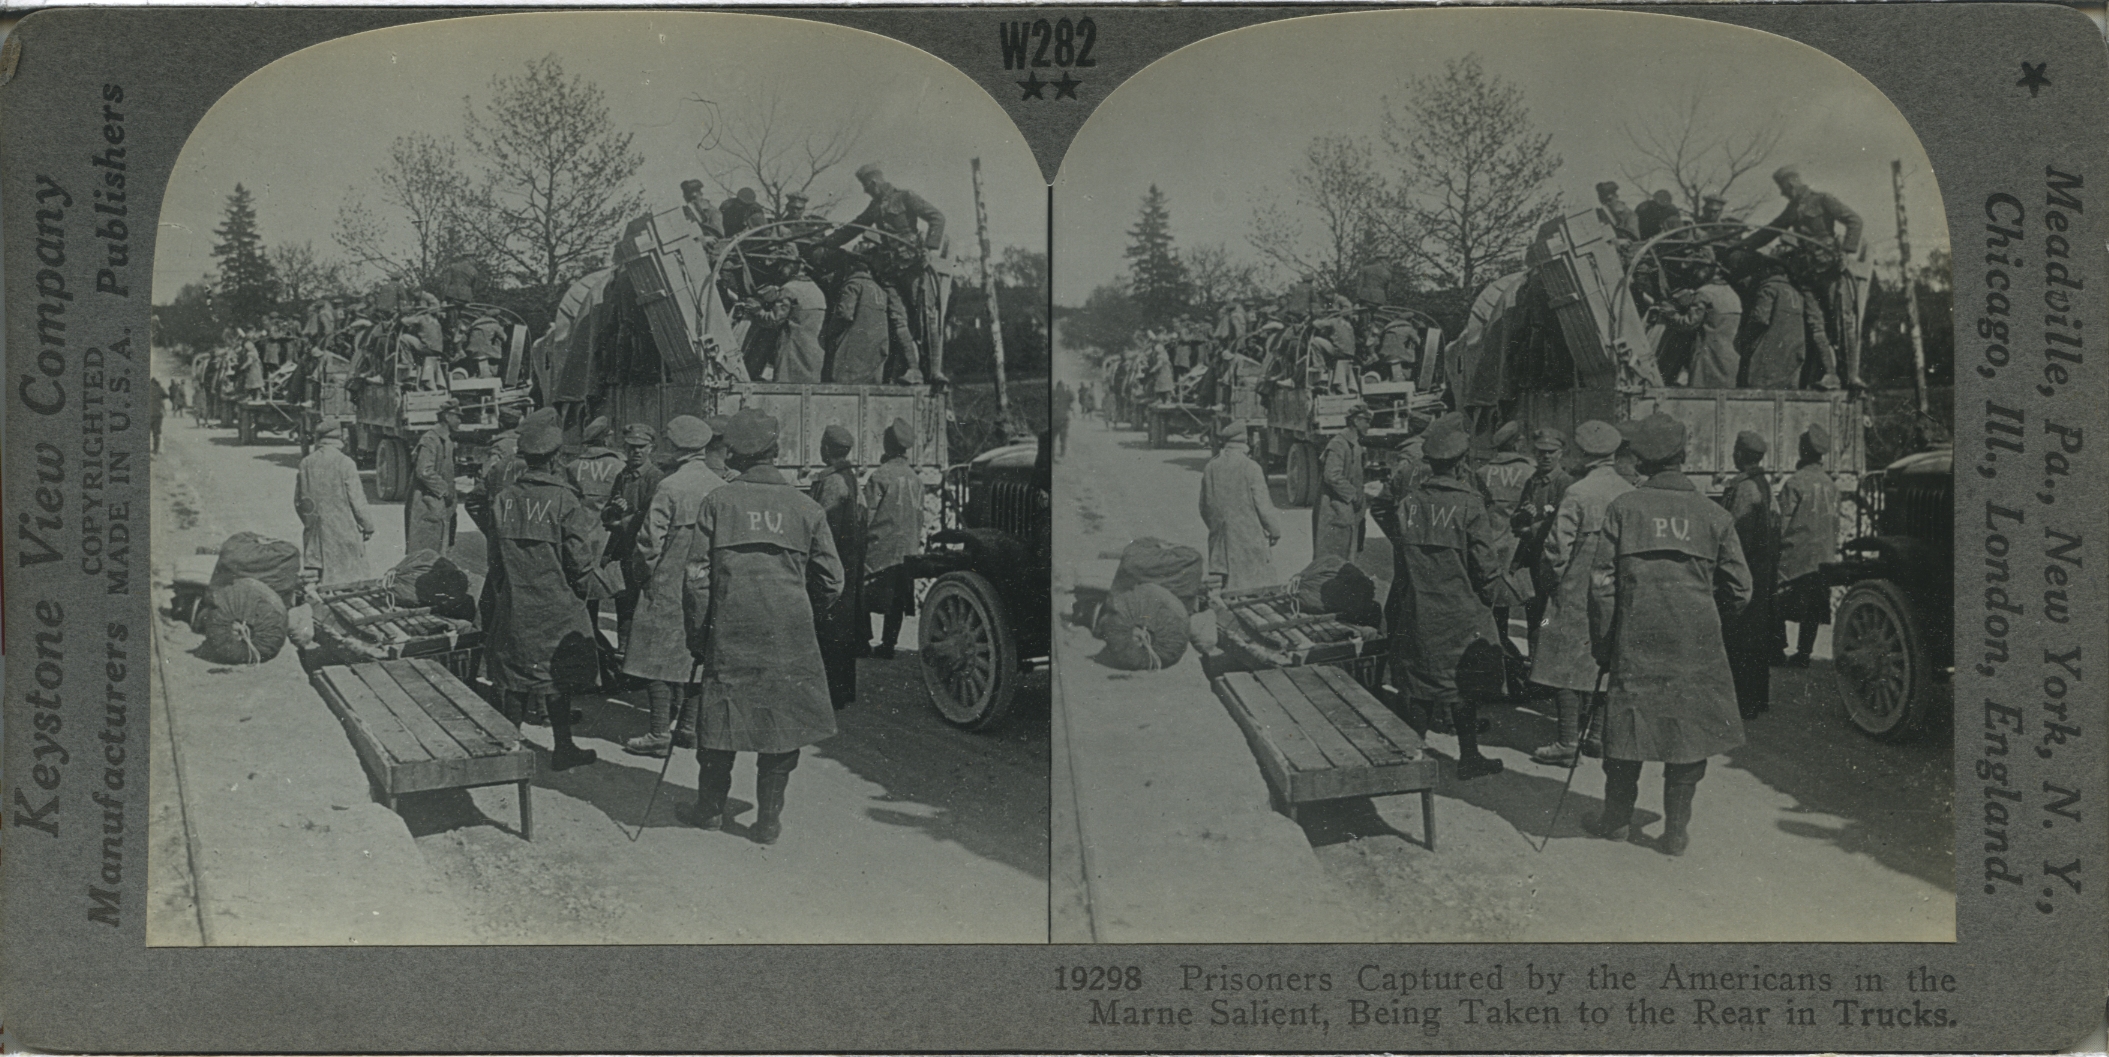 Prisoners Captured by the Americans in the Marne Salient, Being Taken to the Rear in Trucks